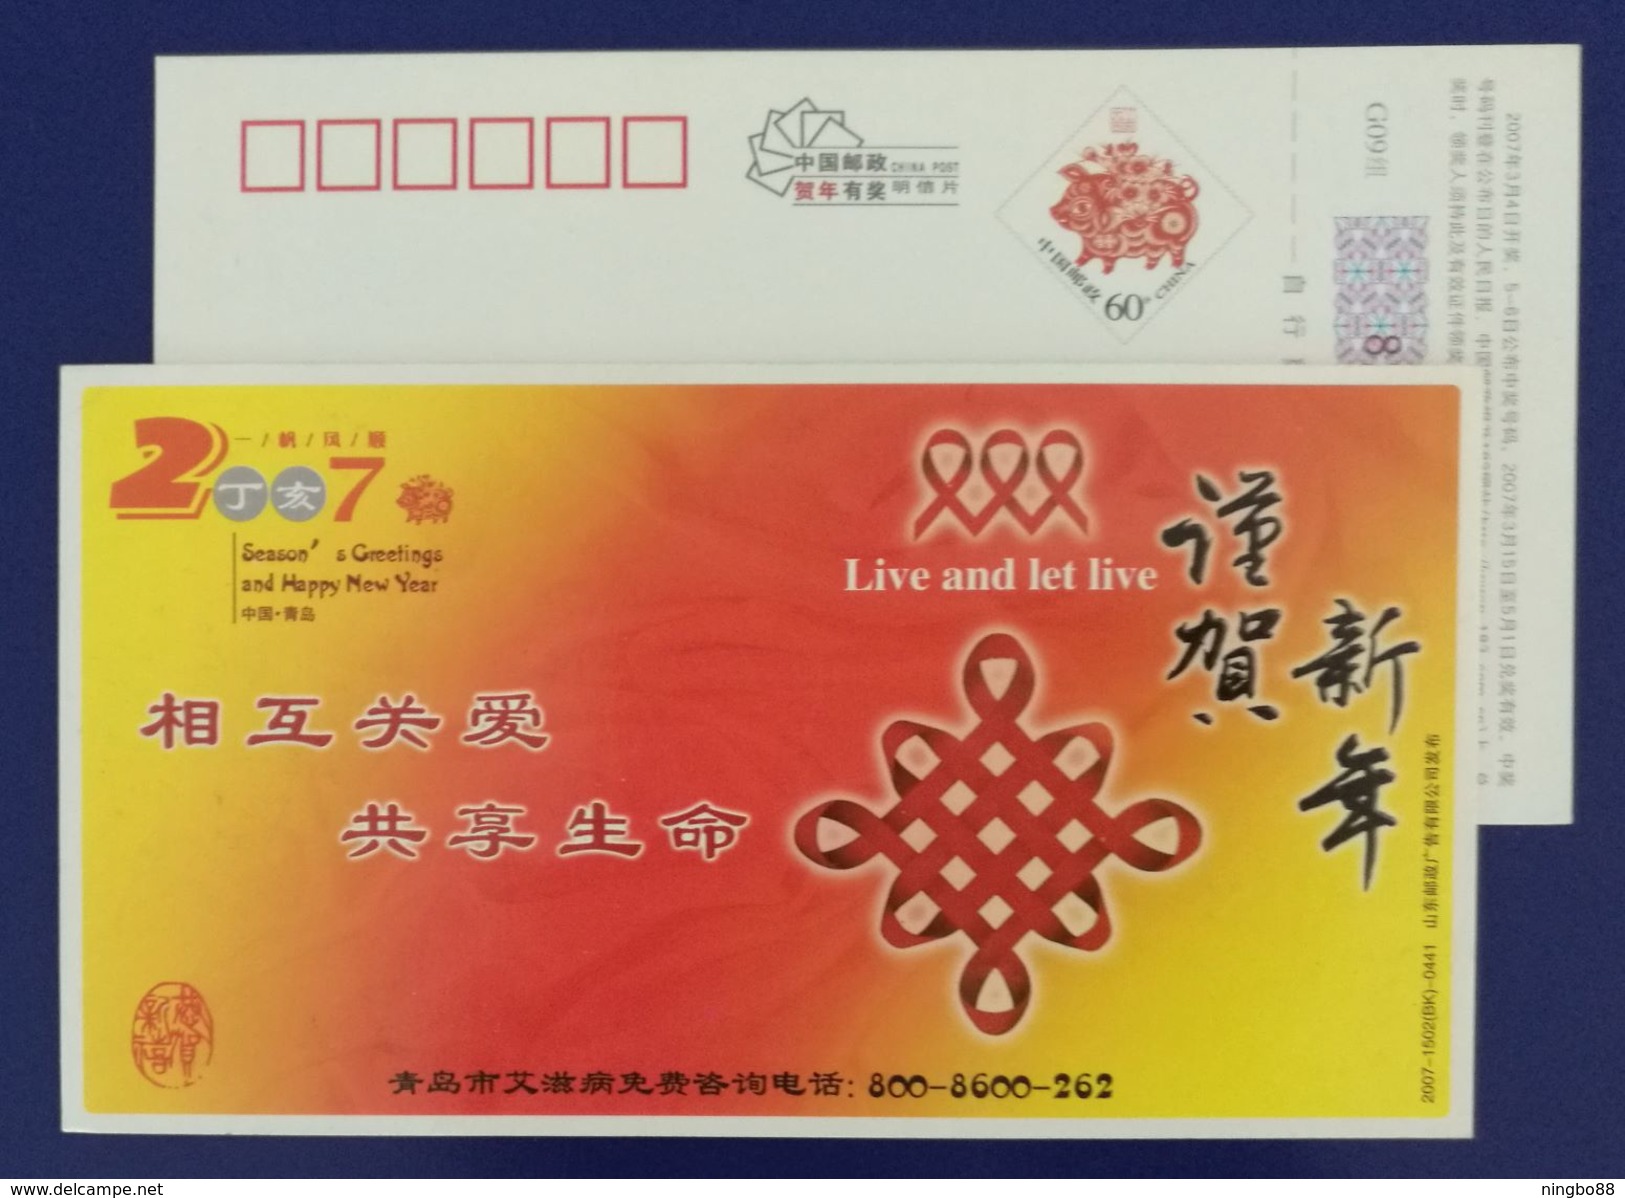 Live And Let Live,Red Ribbon,China 2007 Qingdao Aids Consultation Hotline Advertising Postal Stationery Card - Disease